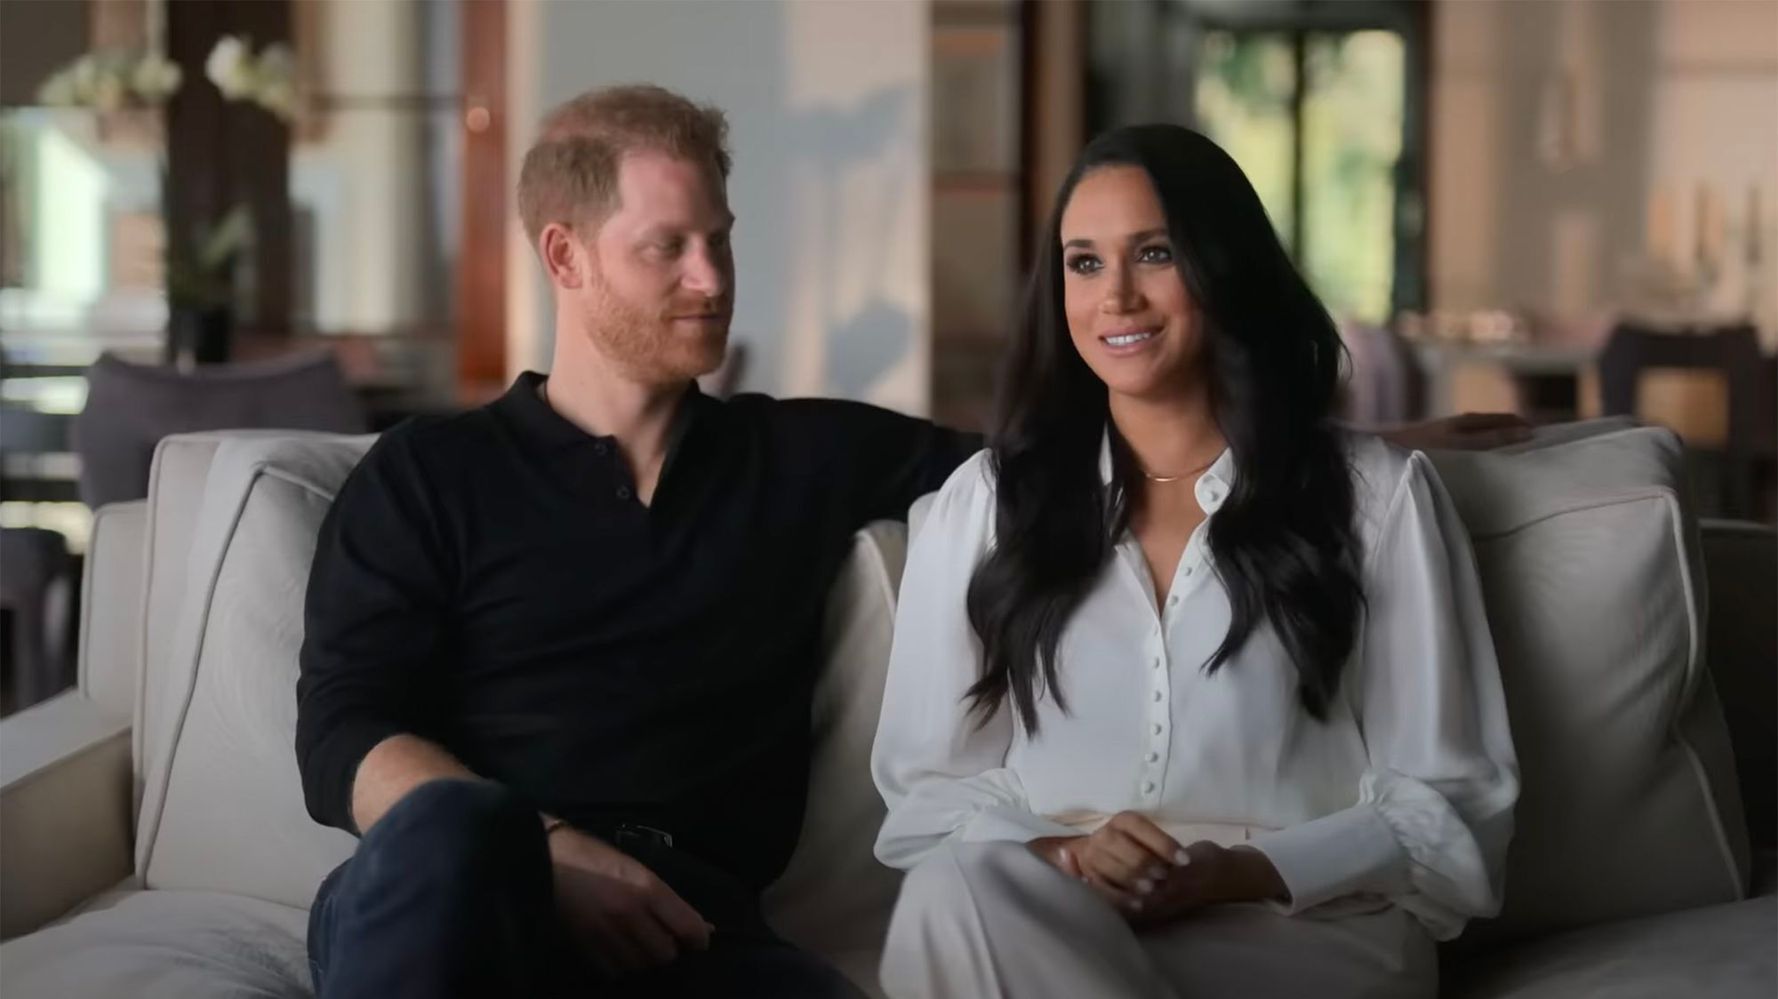 Kayla Lauren Nude - Harry And Meghan's Docuseries Divides Viewers As Netflix 'Crashes' |  HuffPost UK Entertainment